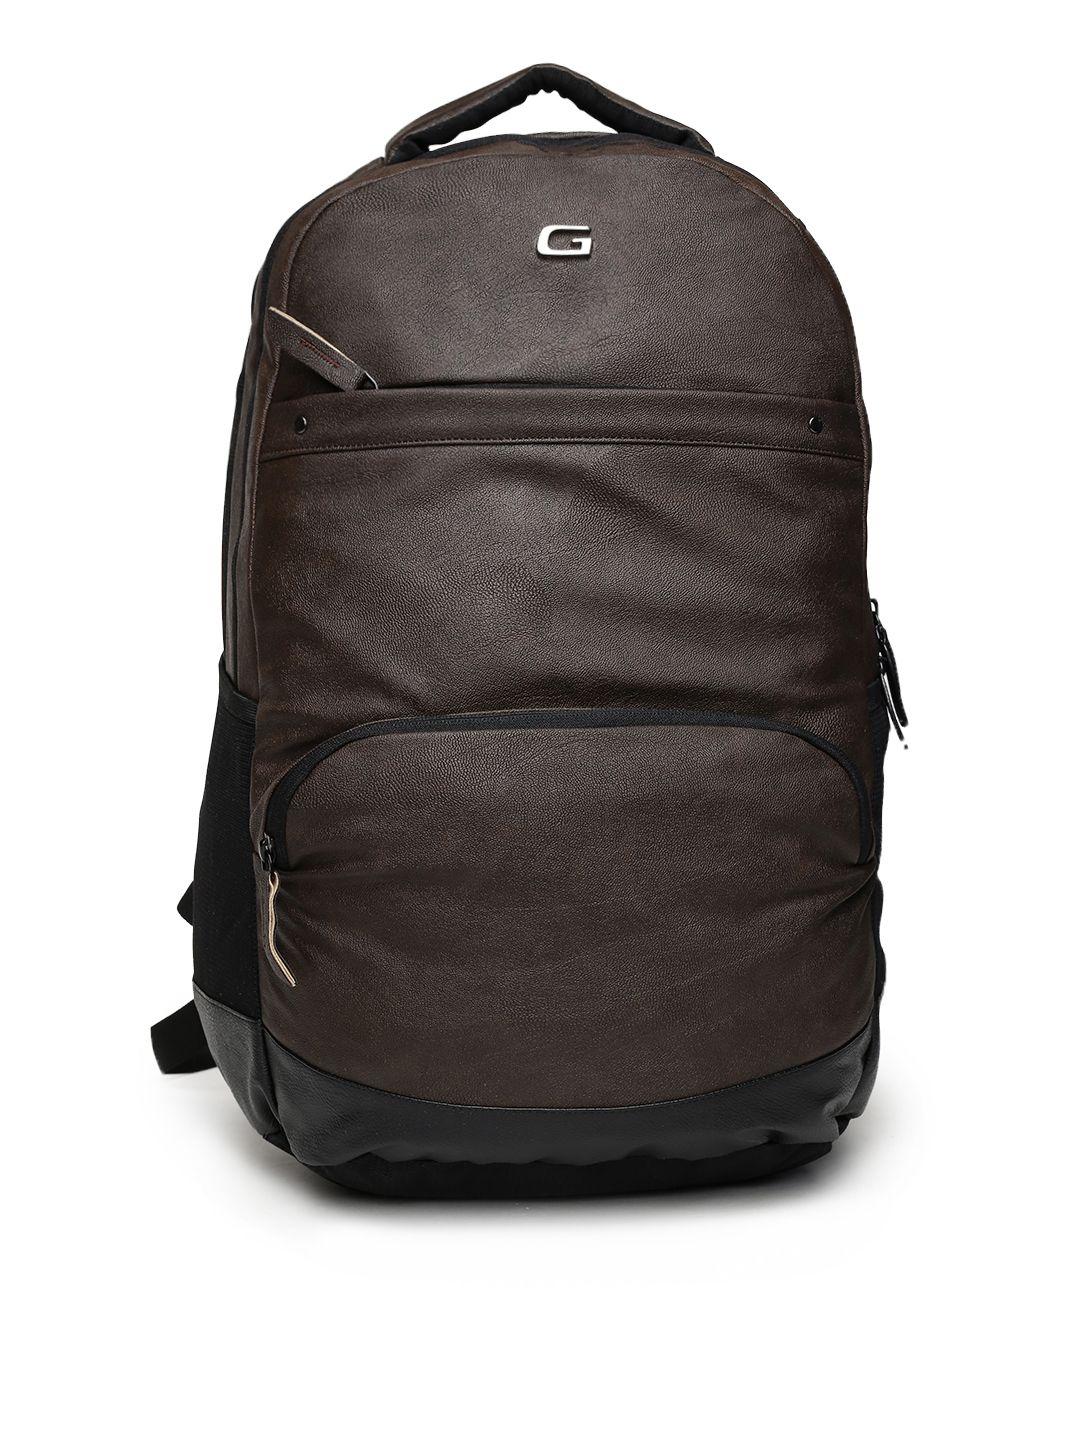 gear unisex brown solid backpack